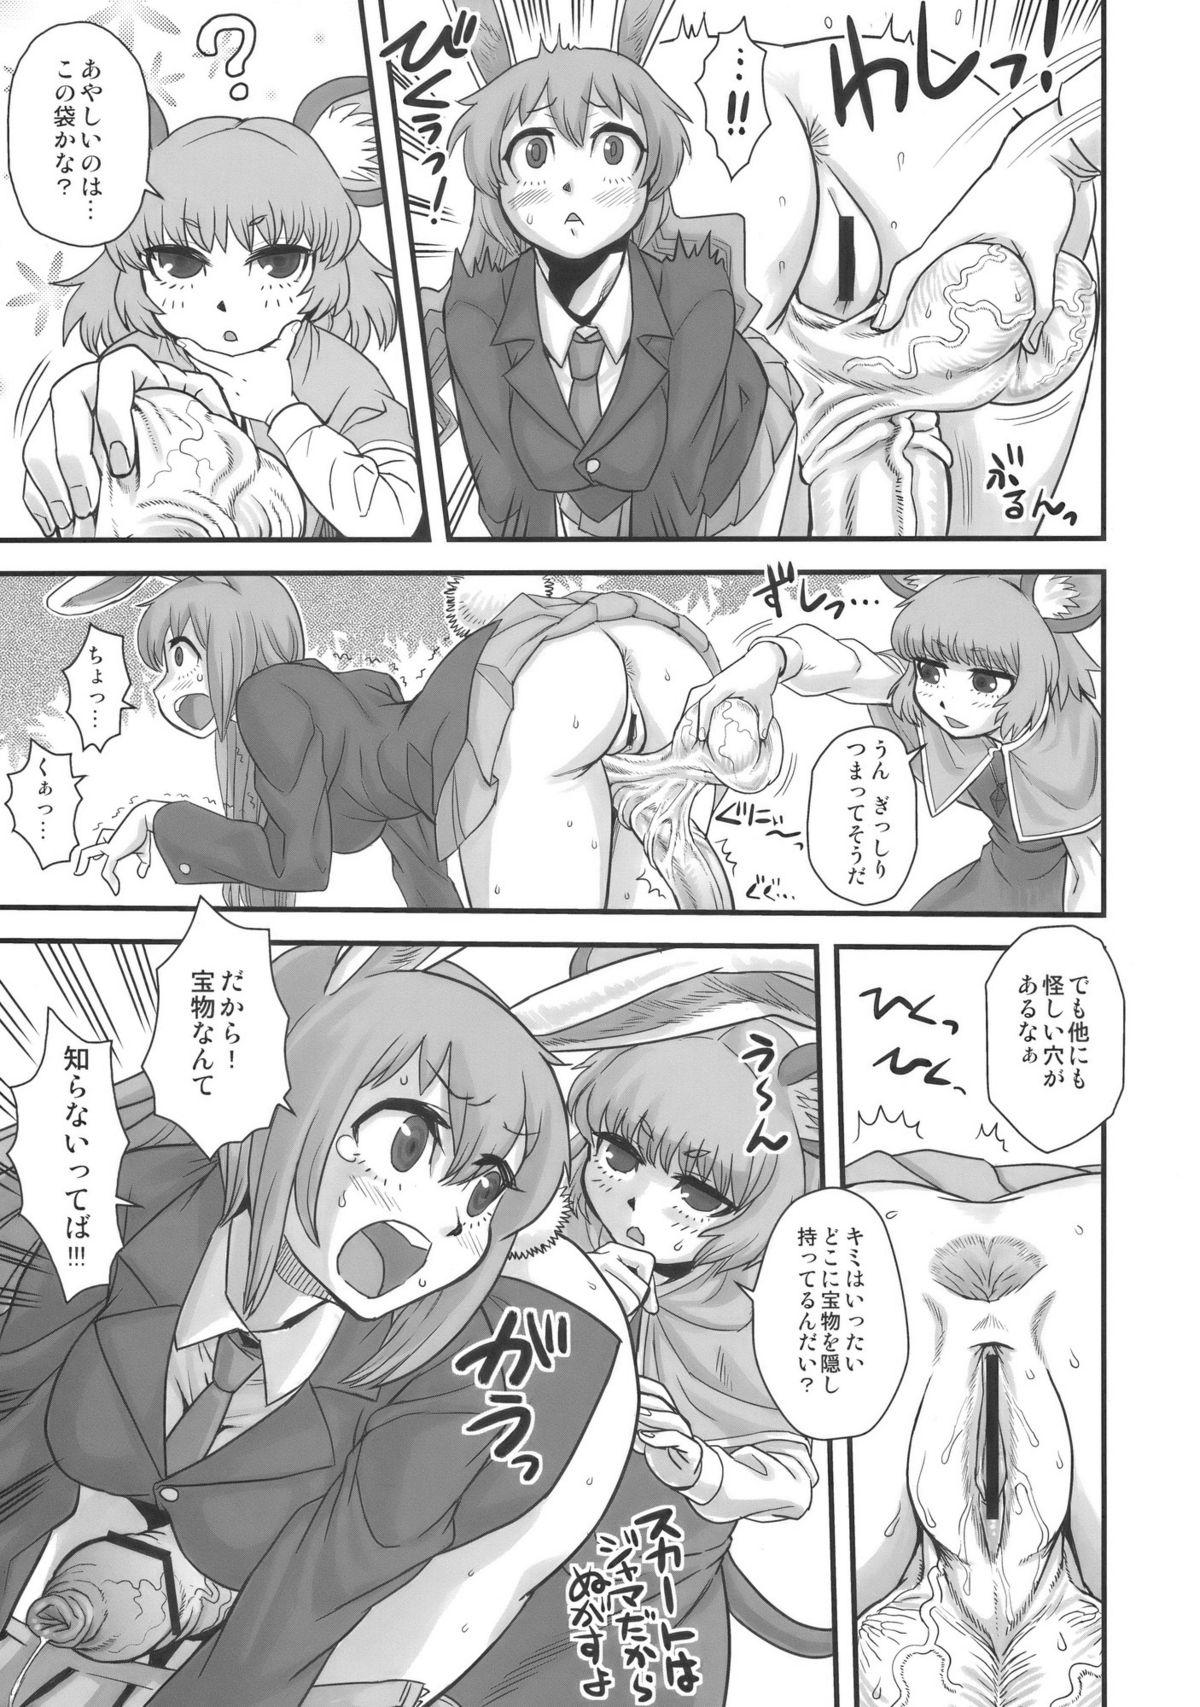 Brasileiro Lunatic Udon - Touhou project Hoe - Page 7